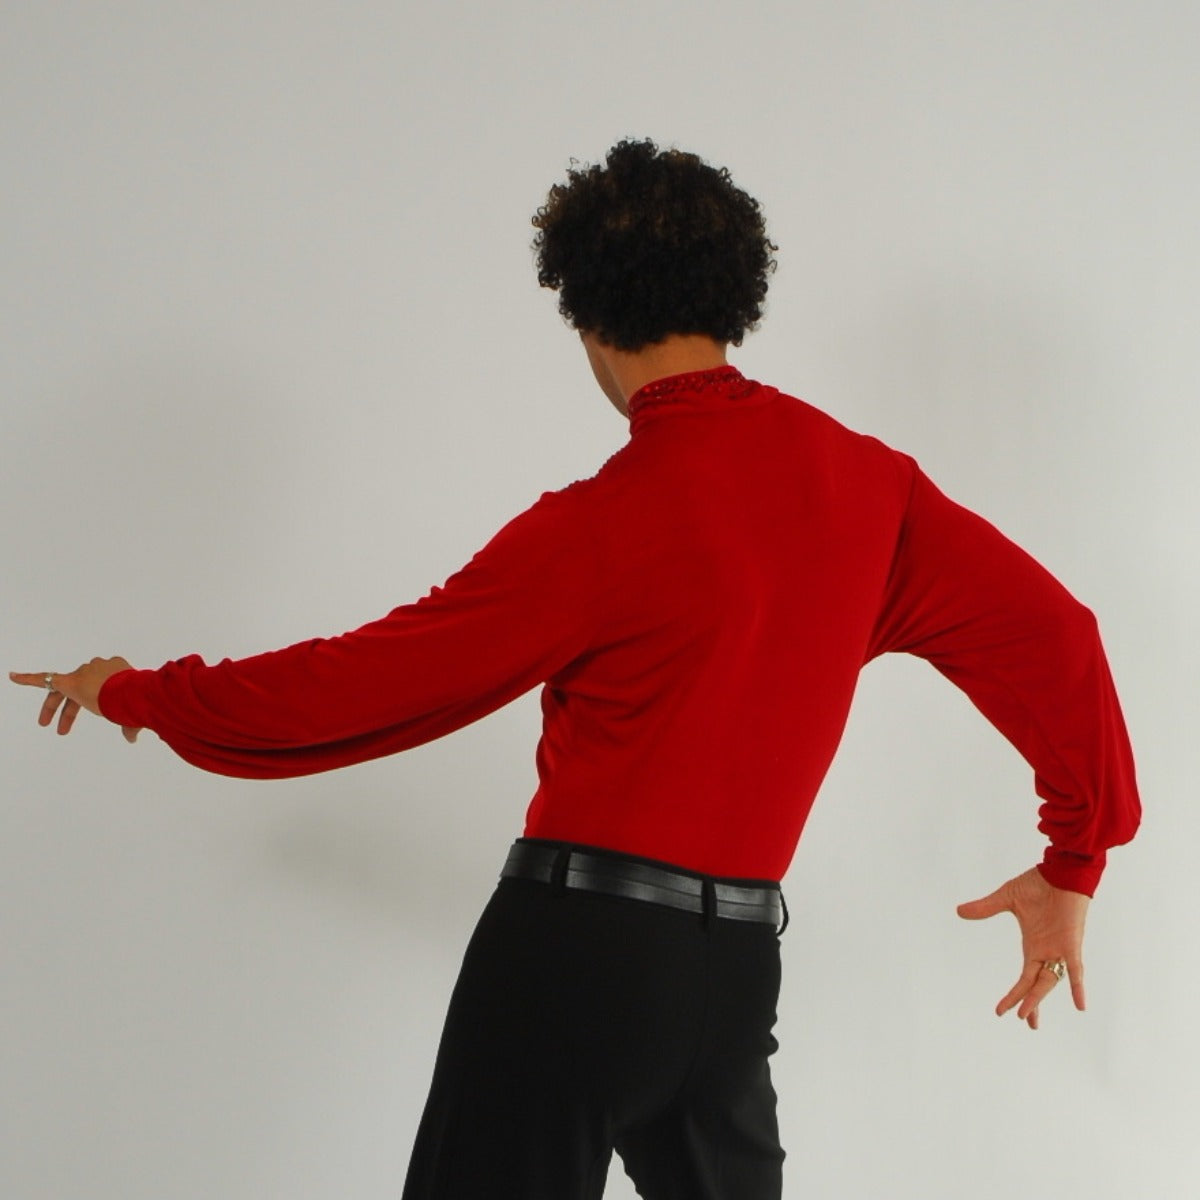 Crystal's Creations back view of men's red Latin shirt